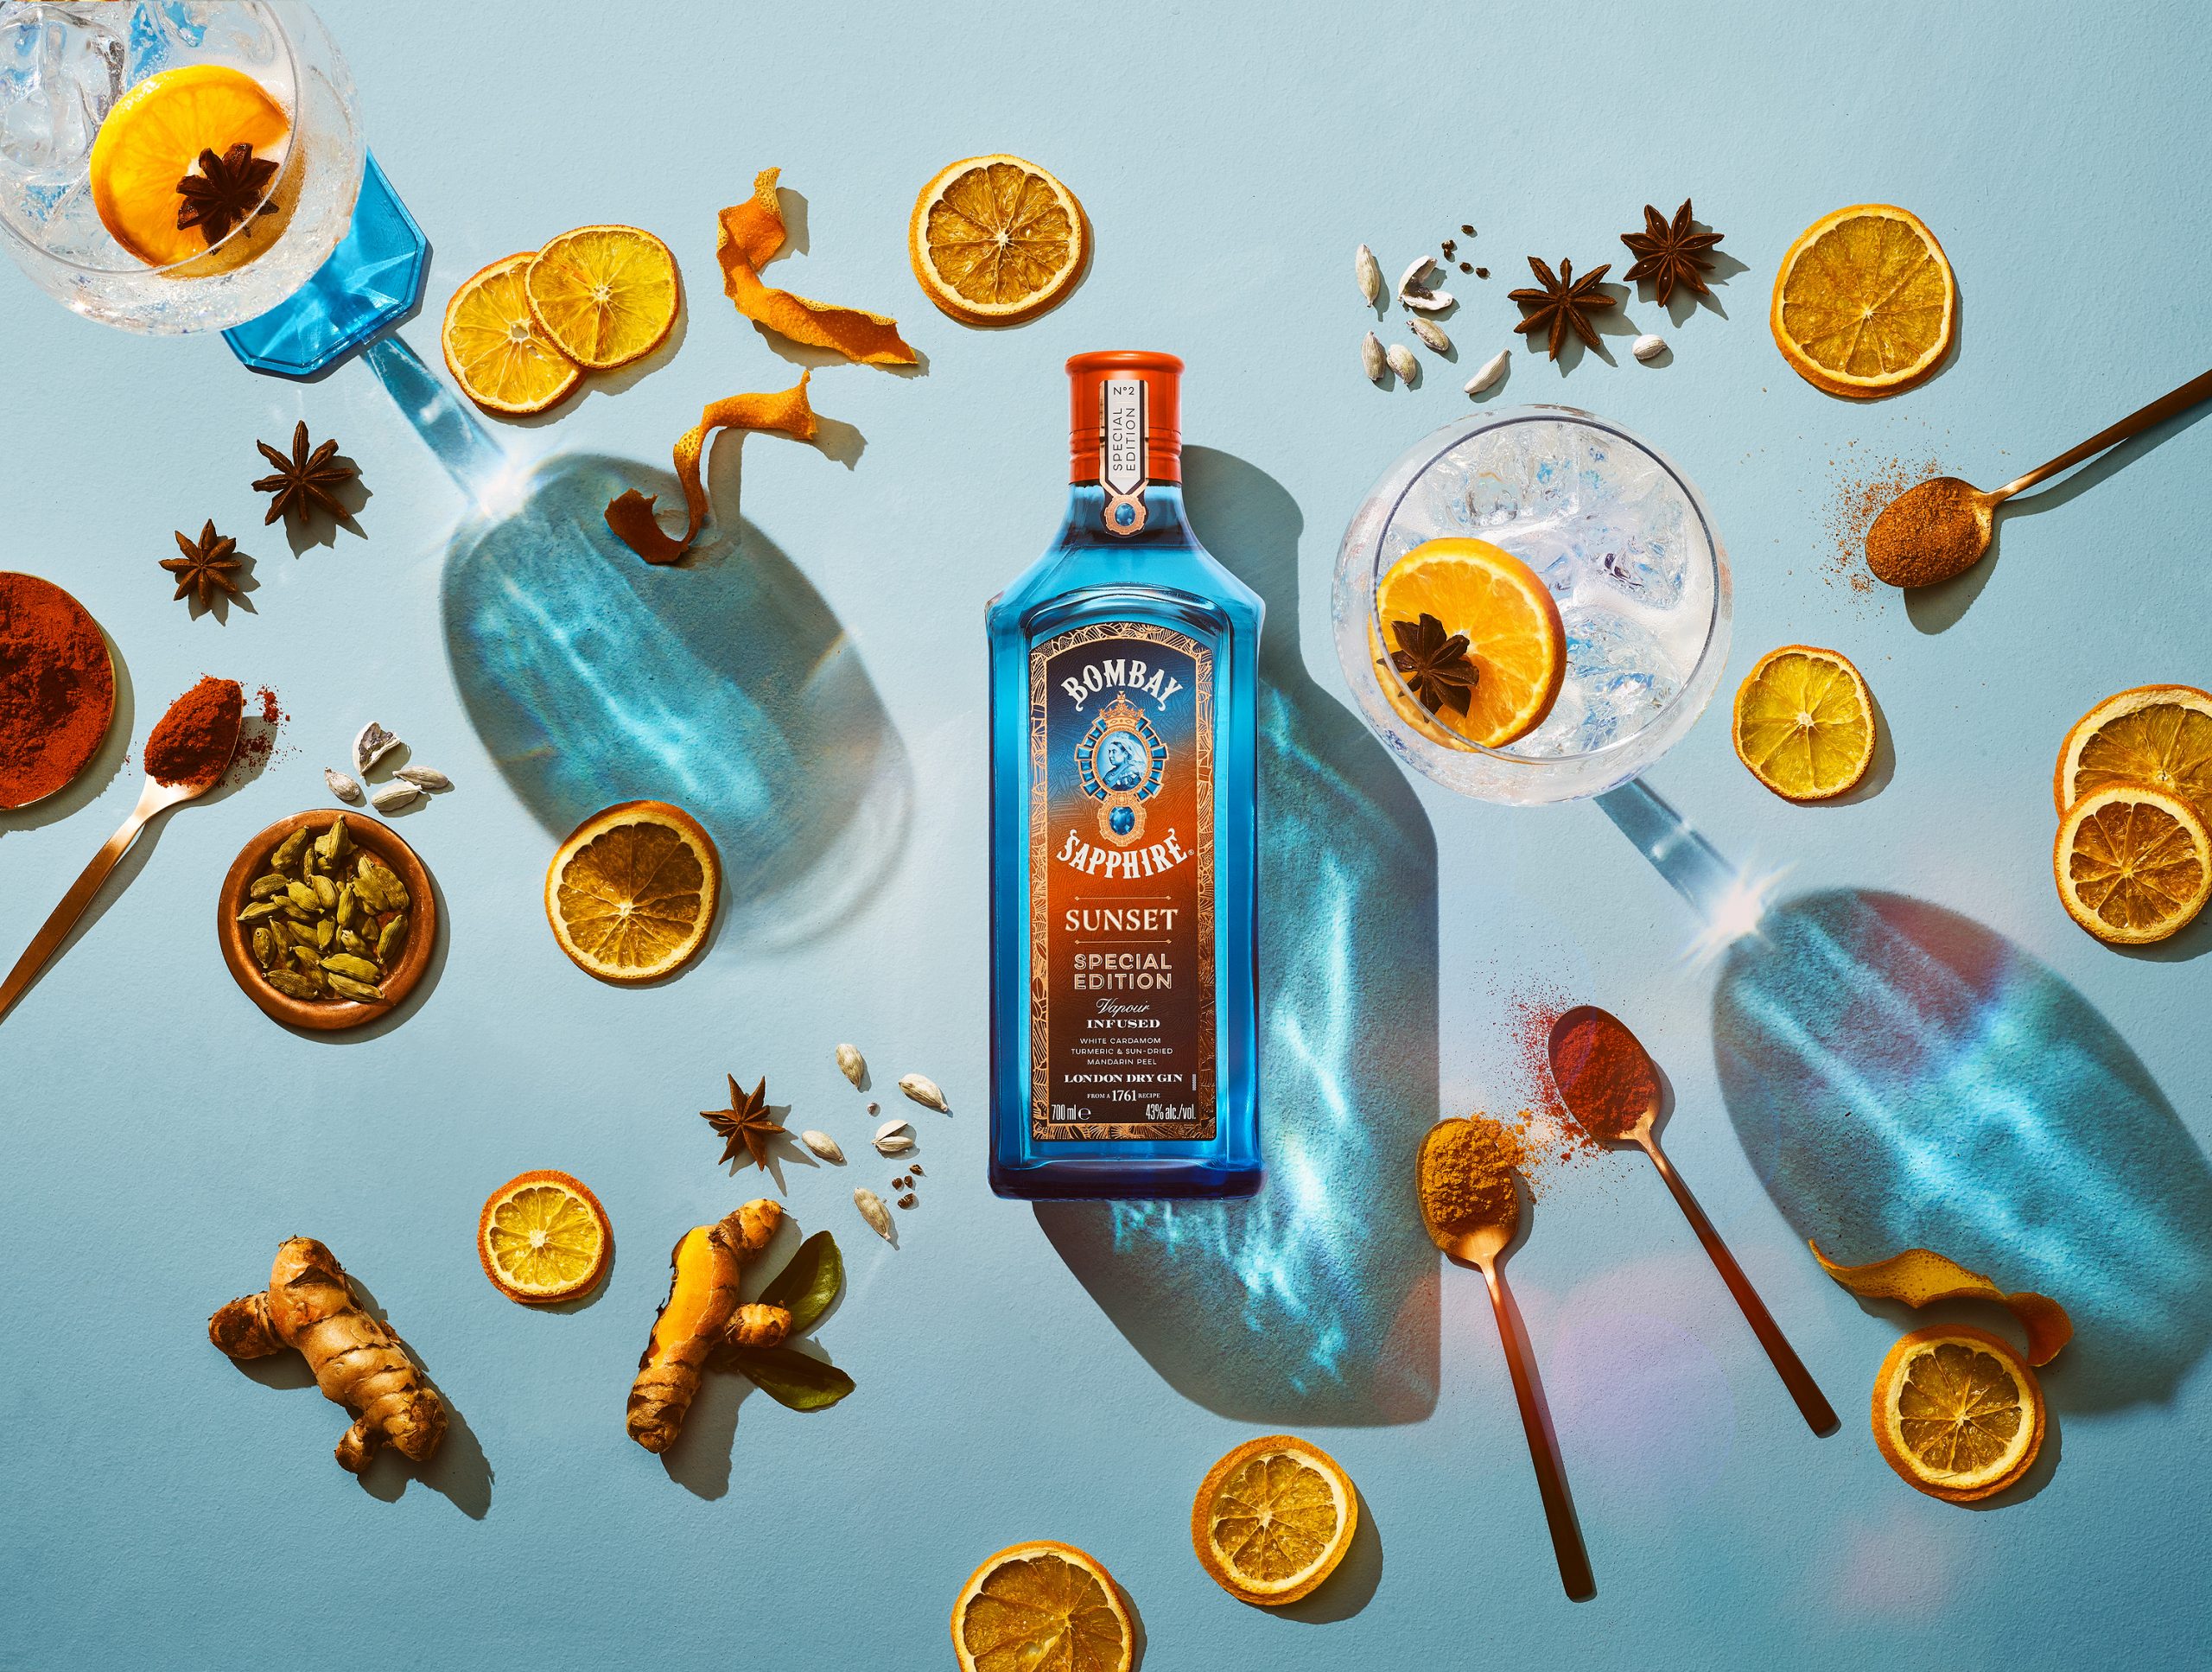 Bombay introduces new Sapphire Sunset special edition gin